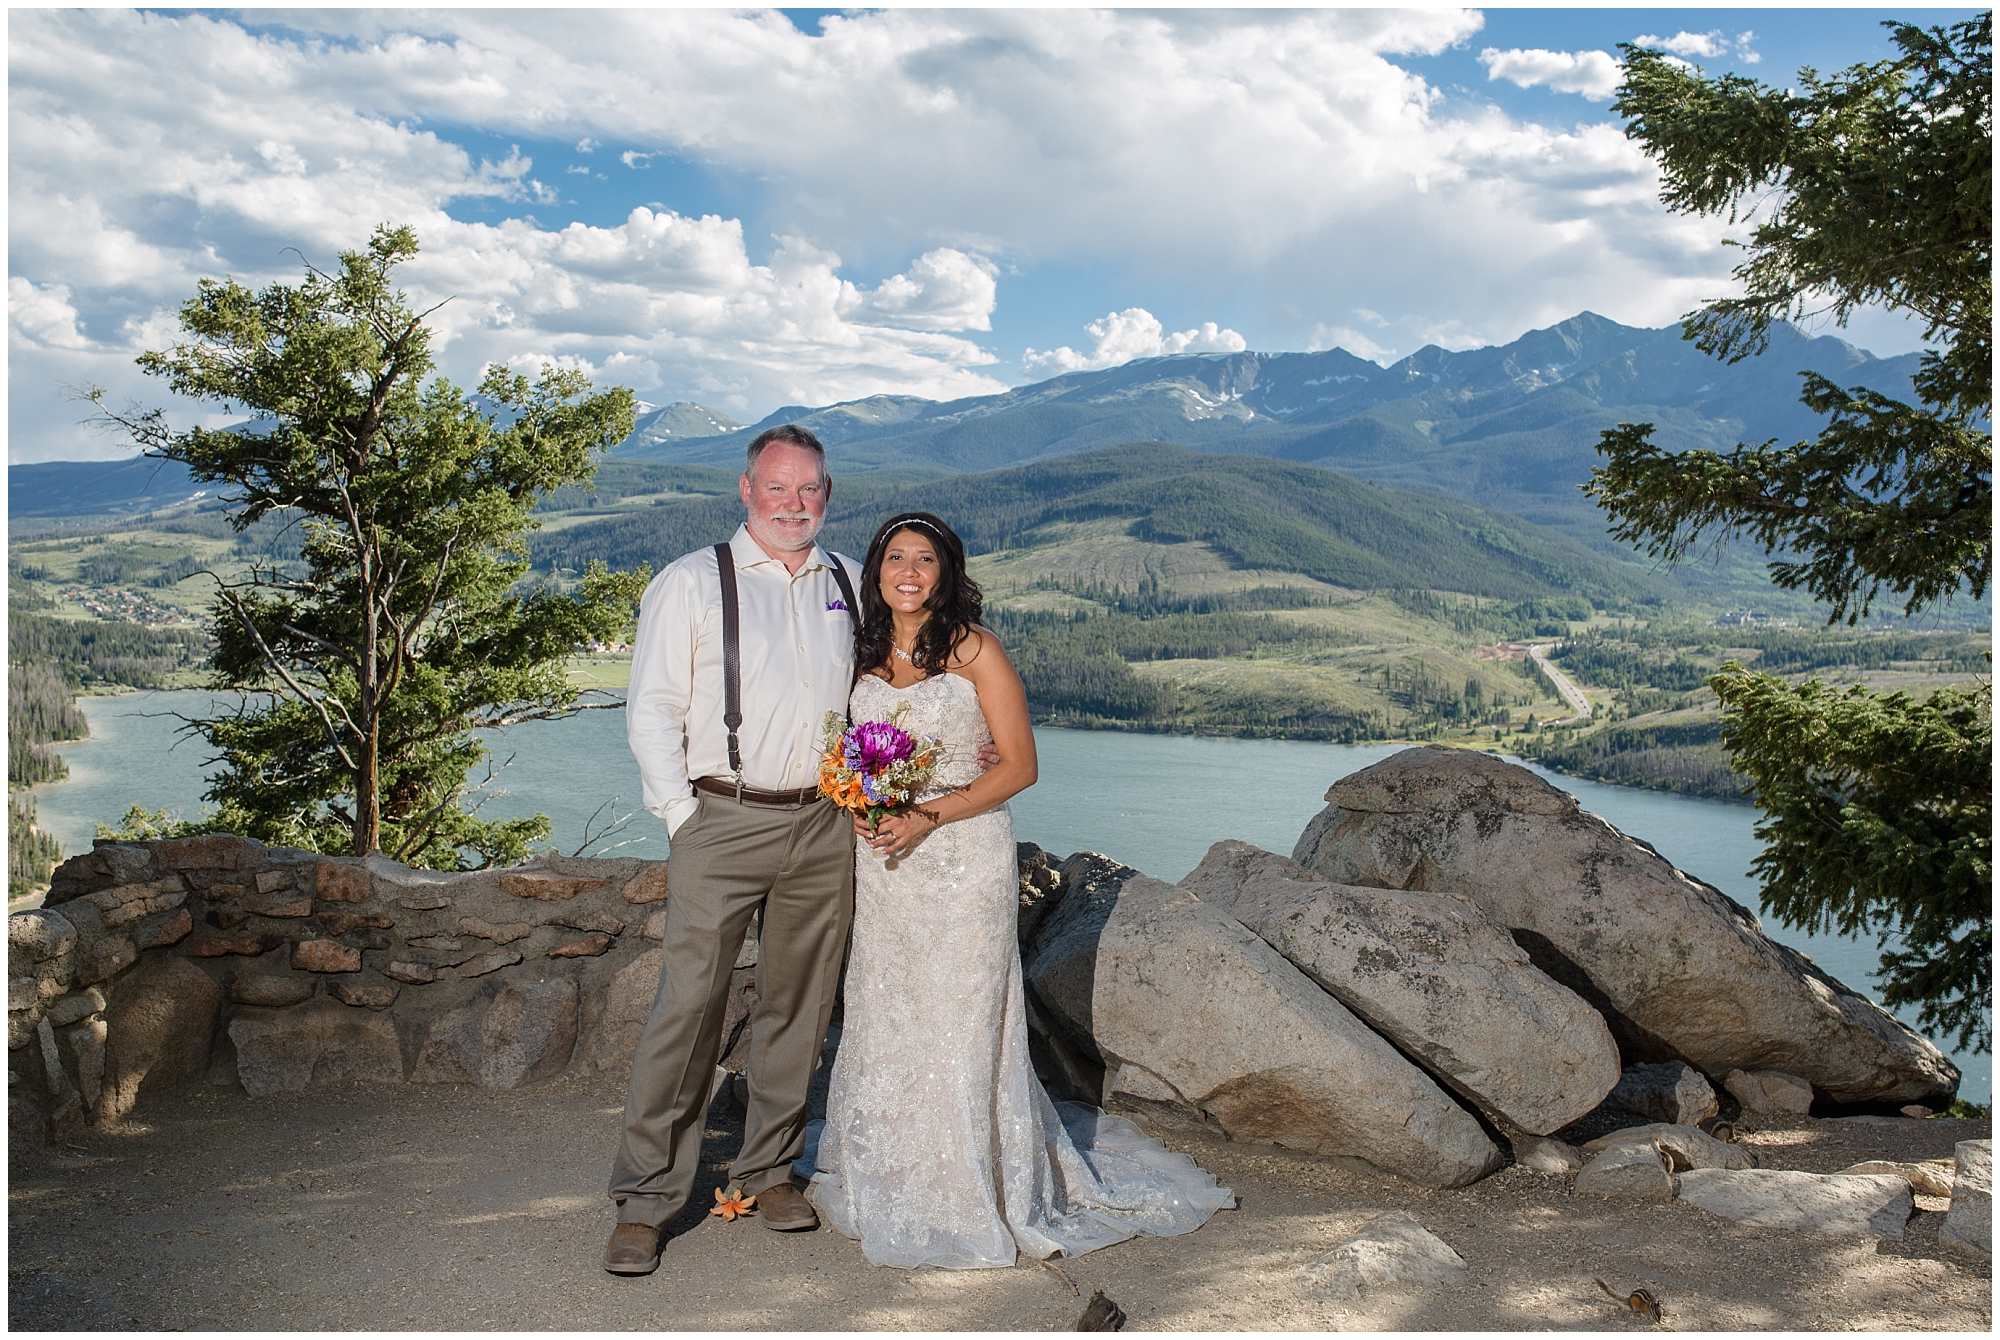 Bride and groom pose for portraits with their Breckenridge wedding photographer.